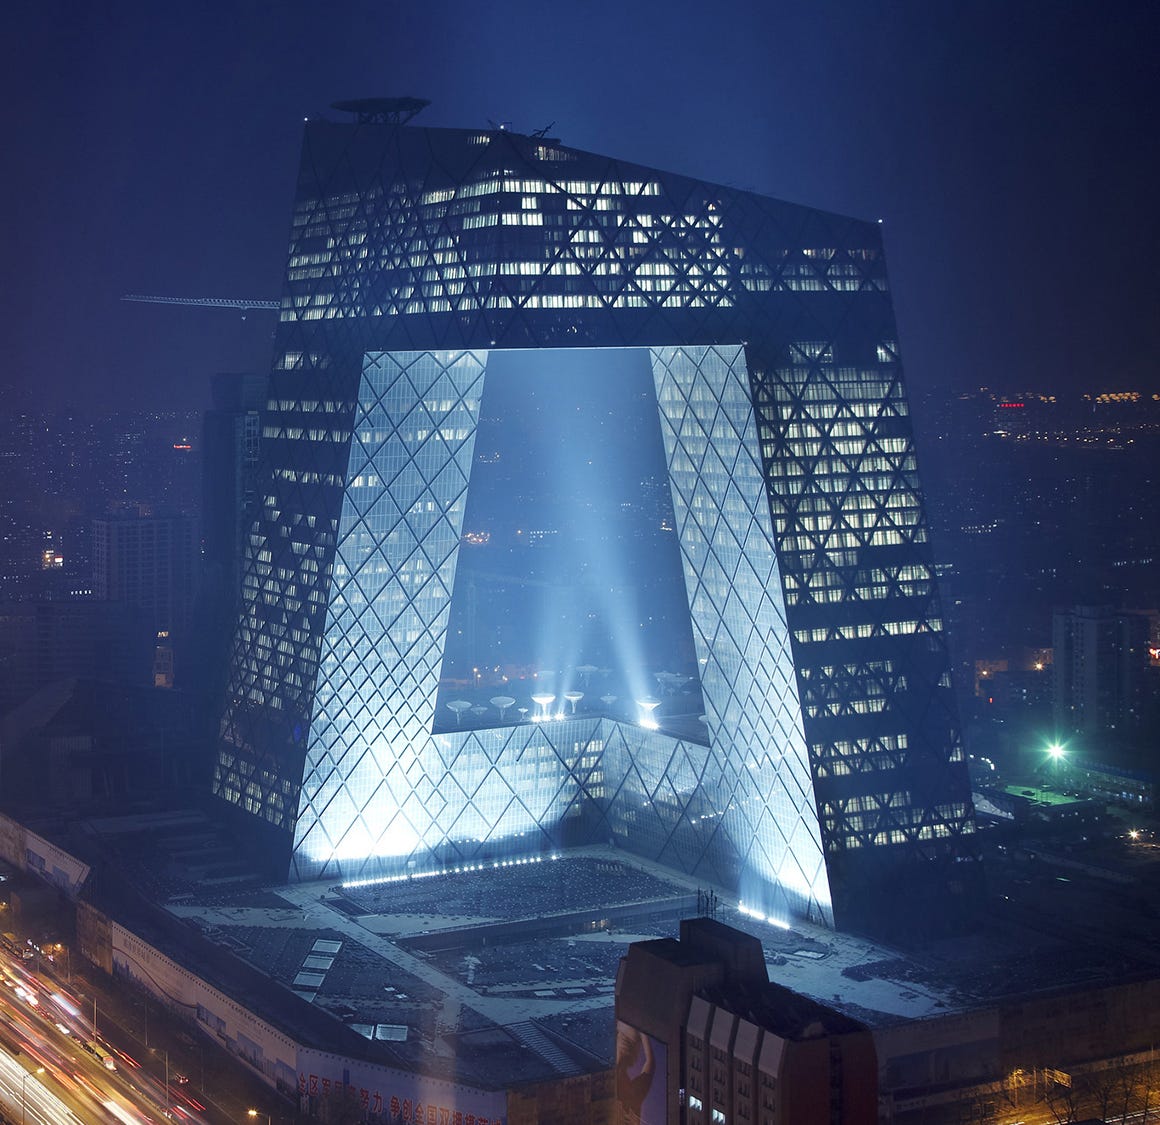 CCTV Headquarters in Beijing, China. Looks somewhat truly evil. :  r/interestingasfuck